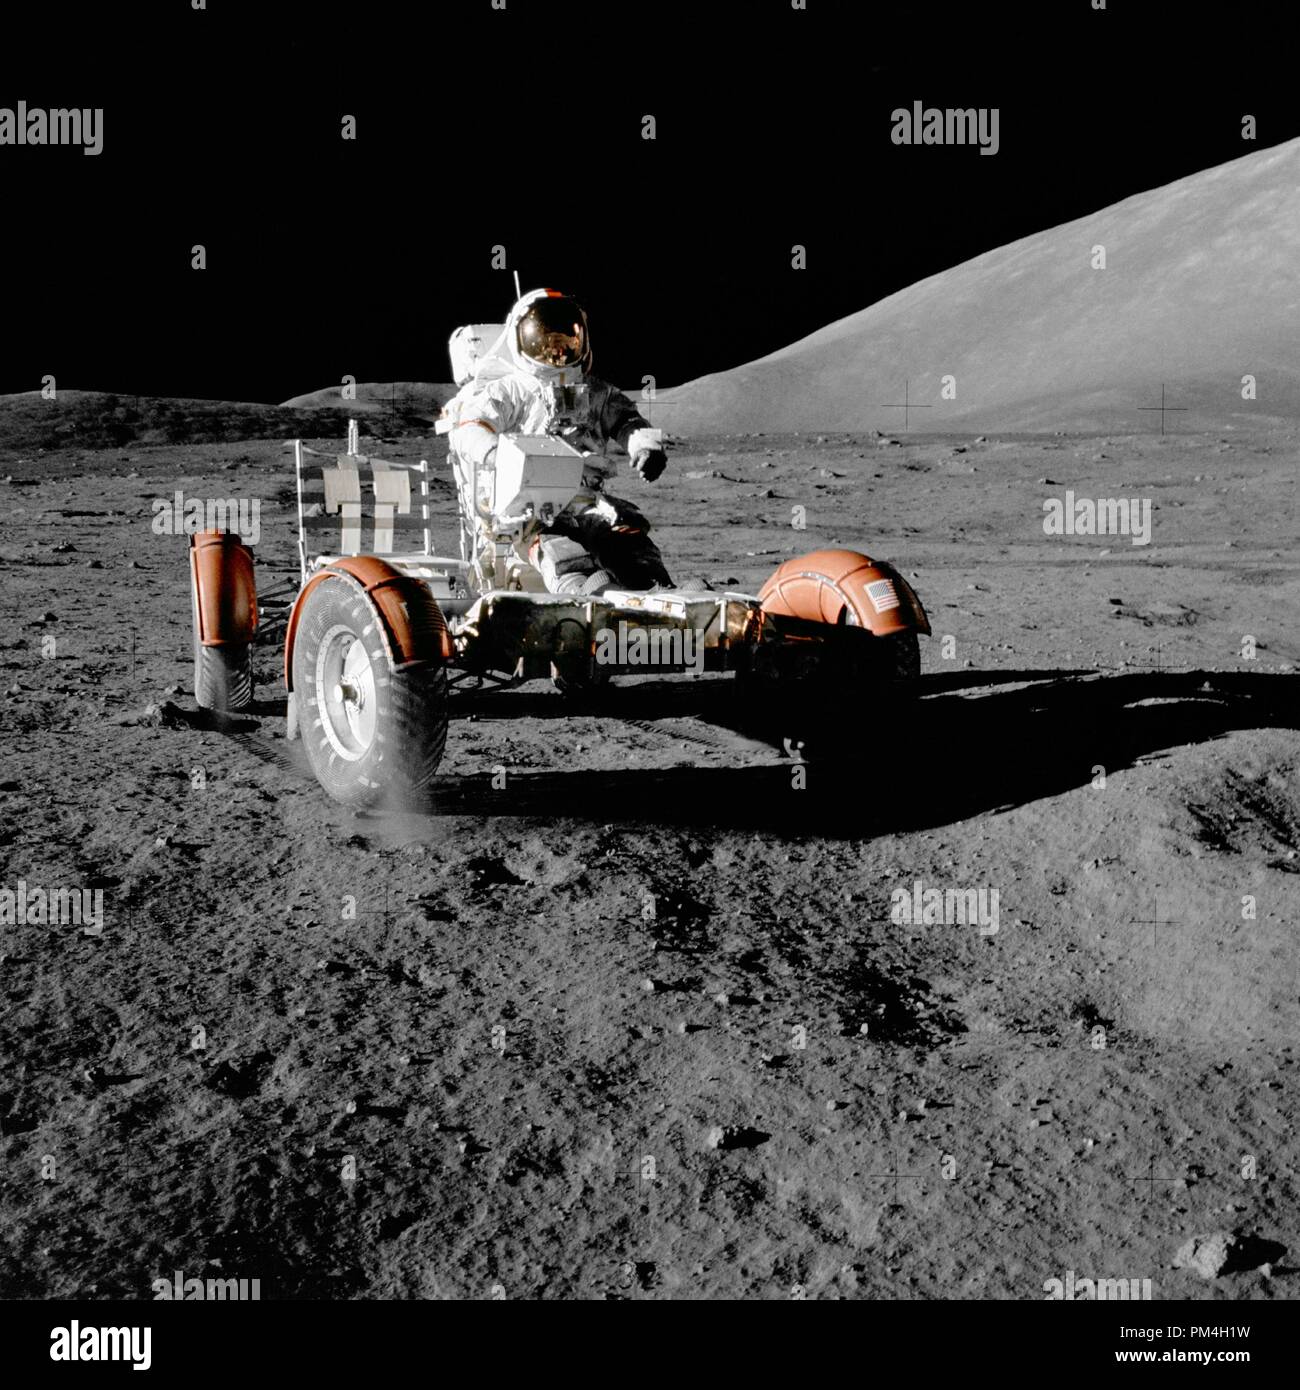 (11 Dec. 1972) --- Astronaut Eugene A. Cernan, commander, makes a short checkout of the Lunar Roving Vehicle (LRV) during the early part of the first Apollo 17 extravehicular activity (EVA) at the Taurus-Littrow landing site. This view of the 'stripped down' LRV is prior to loading up. Equipment later loaded onto the LRV included the ground-controlled television assembly, the lunar communications relay unit, hi-gain antenna, low-gain antenna, aft tool pallet, lunar tools and scientific gear. This photograph was taken by scientist-astronaut Harrison H. Schmitt, lunar module pilot. The mountain Stock Photo